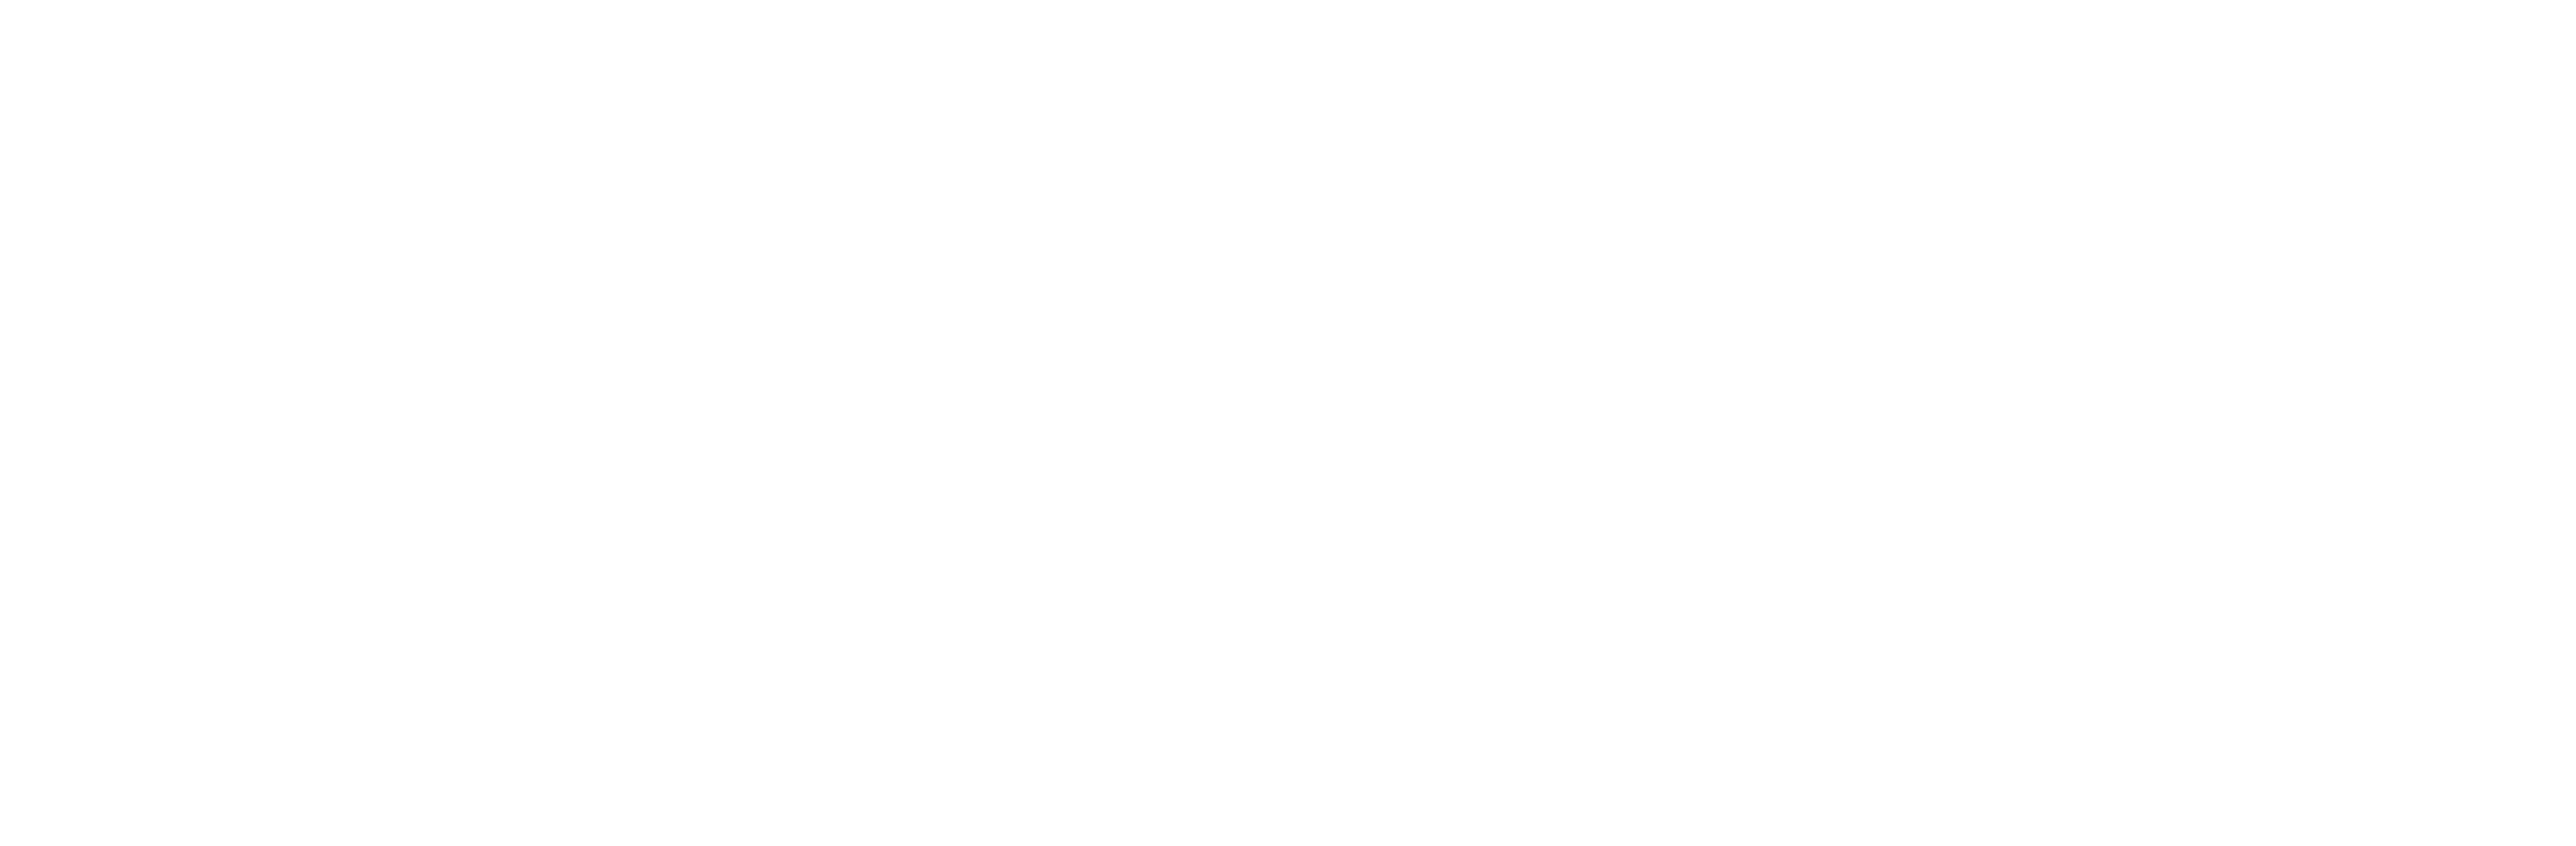 Doh Cabs Limousine Service in Doha Qatar